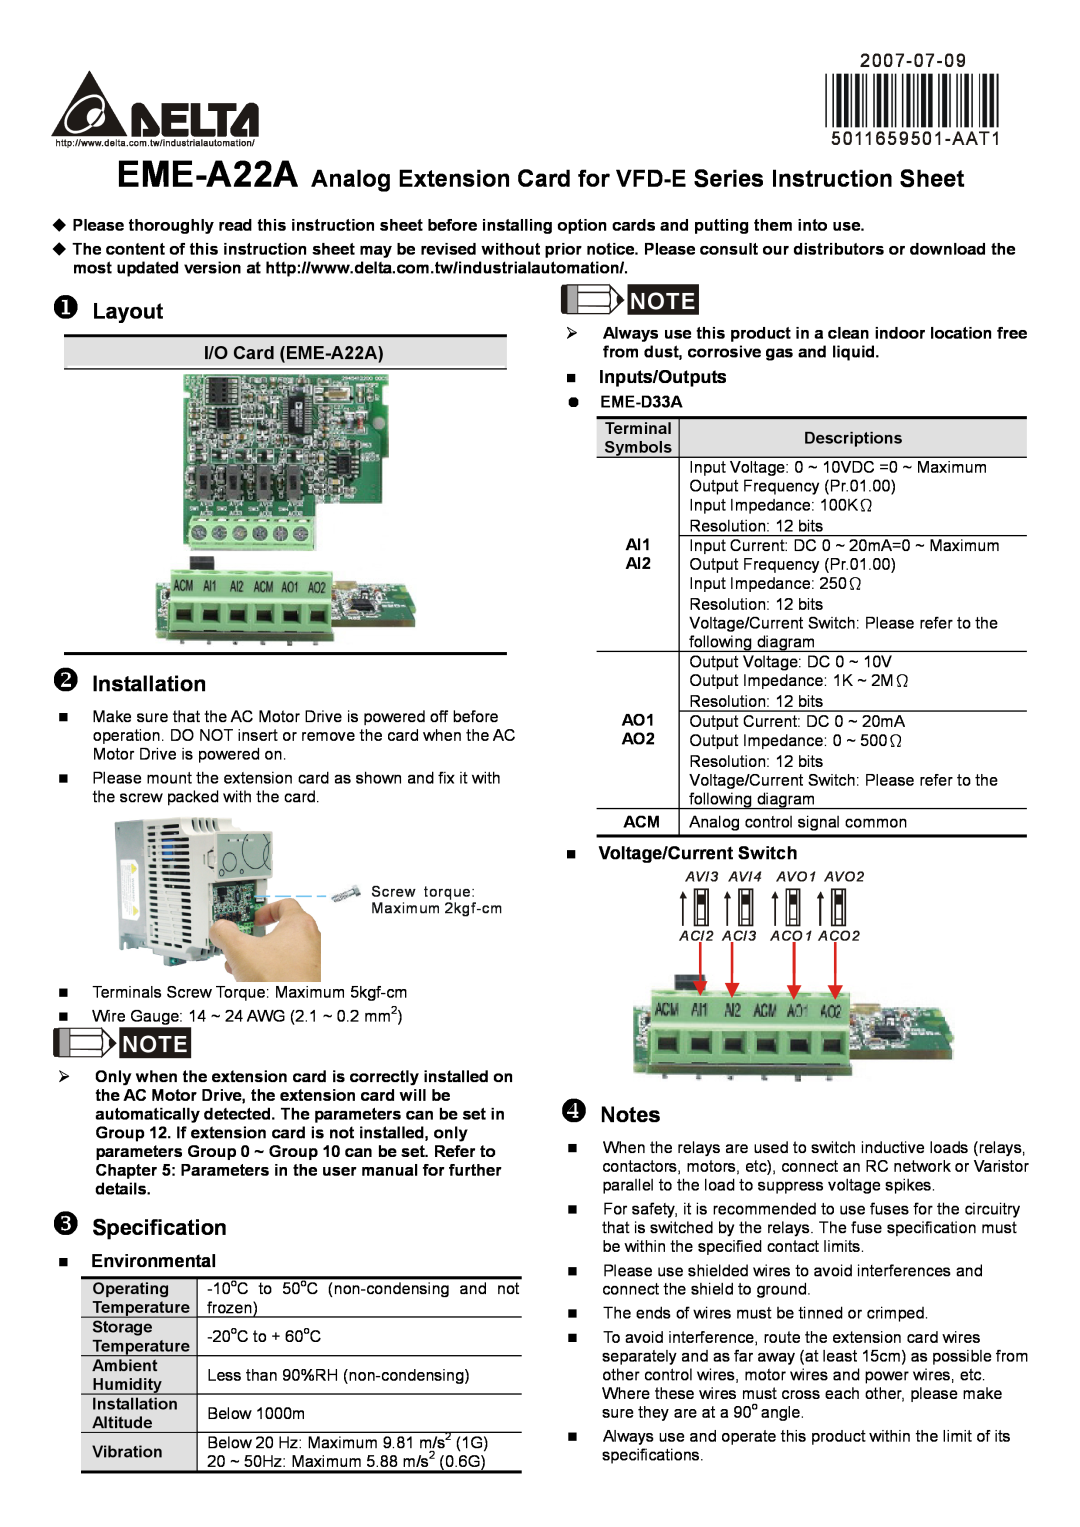 Delta Electronics instruction sheet I/O Card EME-A22A, Inputs/Outputs, Voltage/Current Switch, Environmental, Layout 